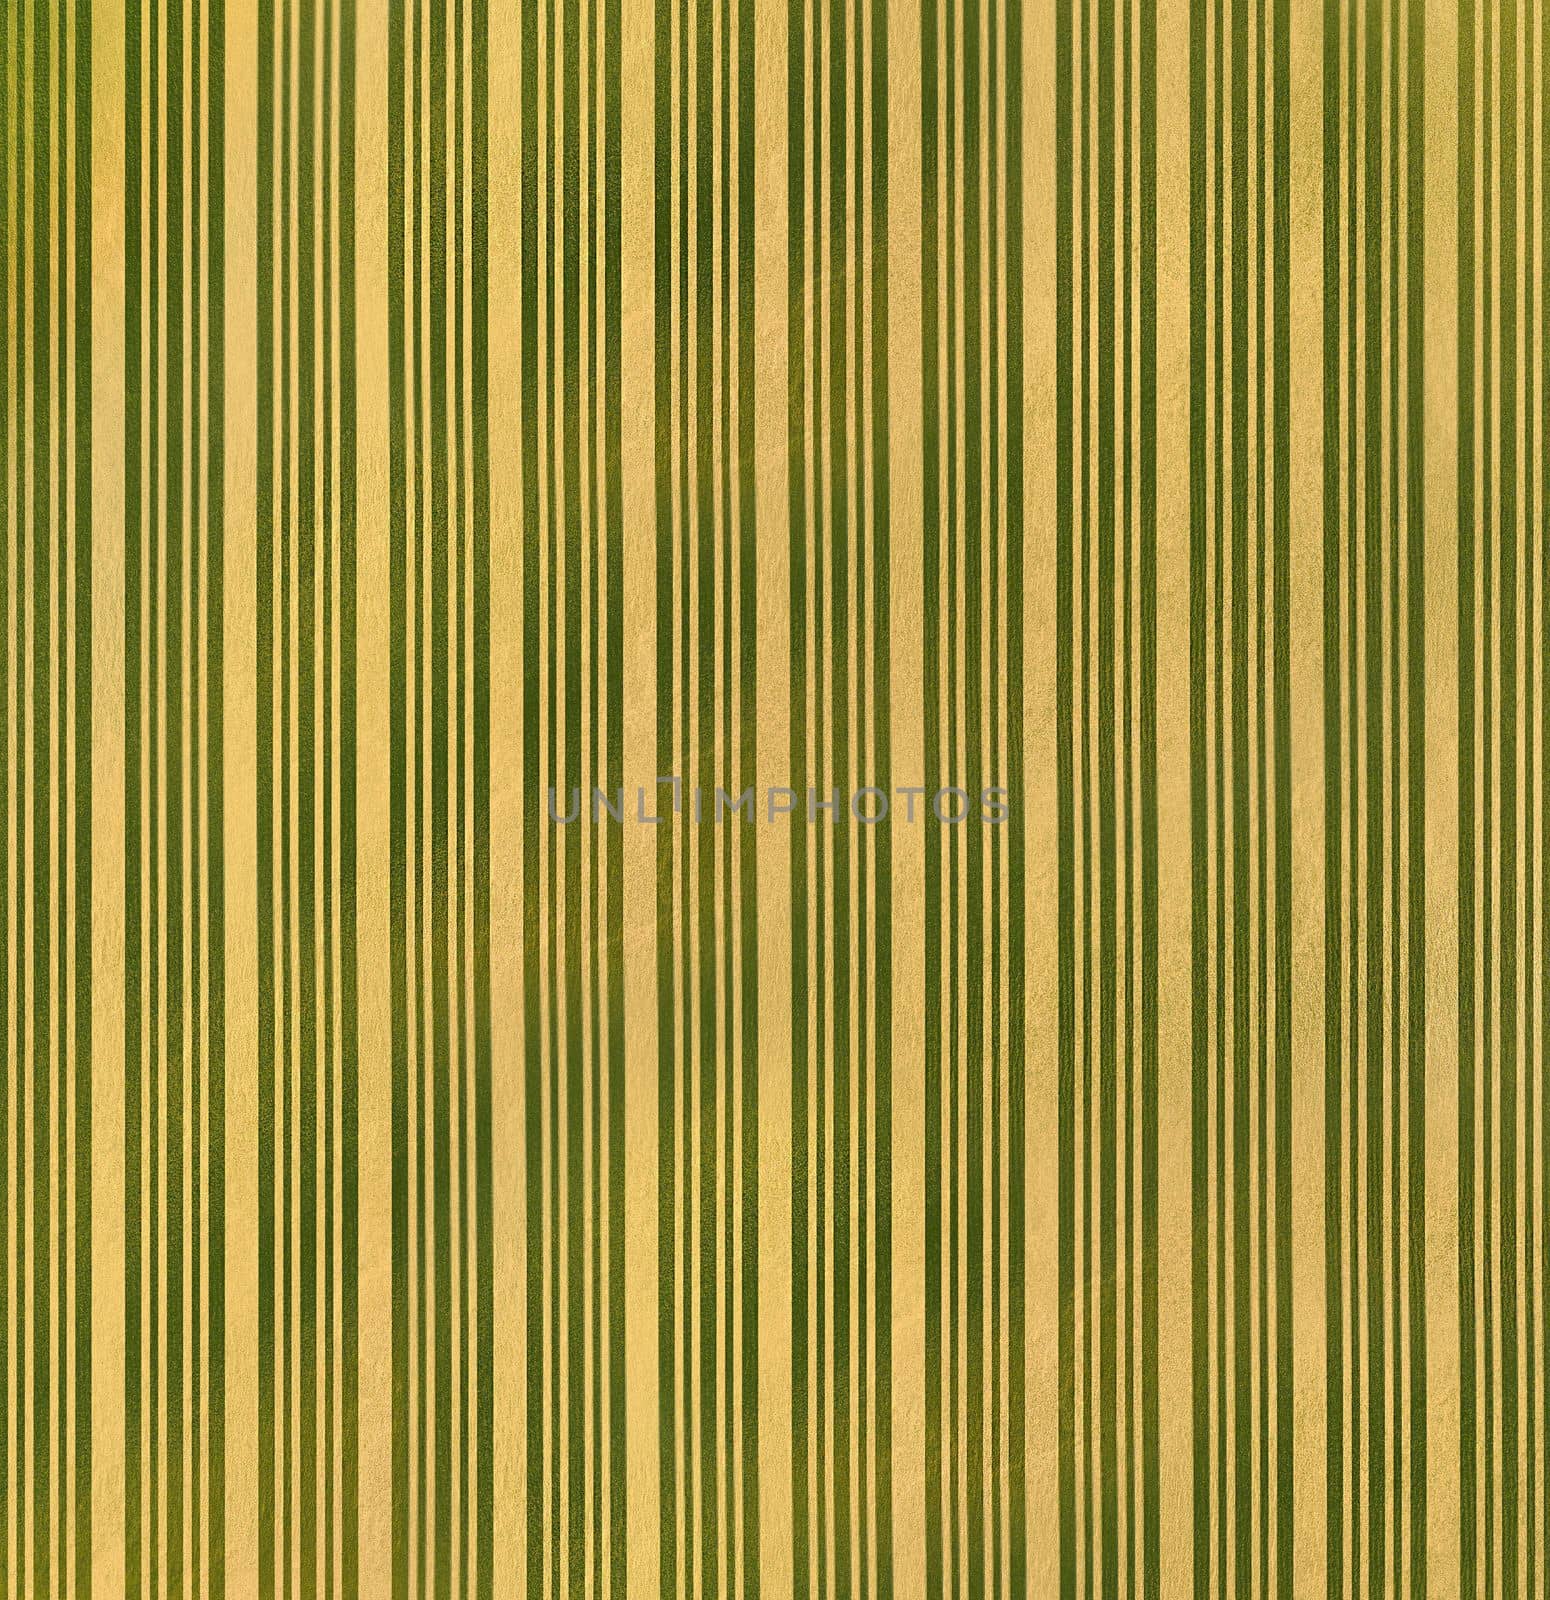 Yellow-green background with vertical lines.Texture or background